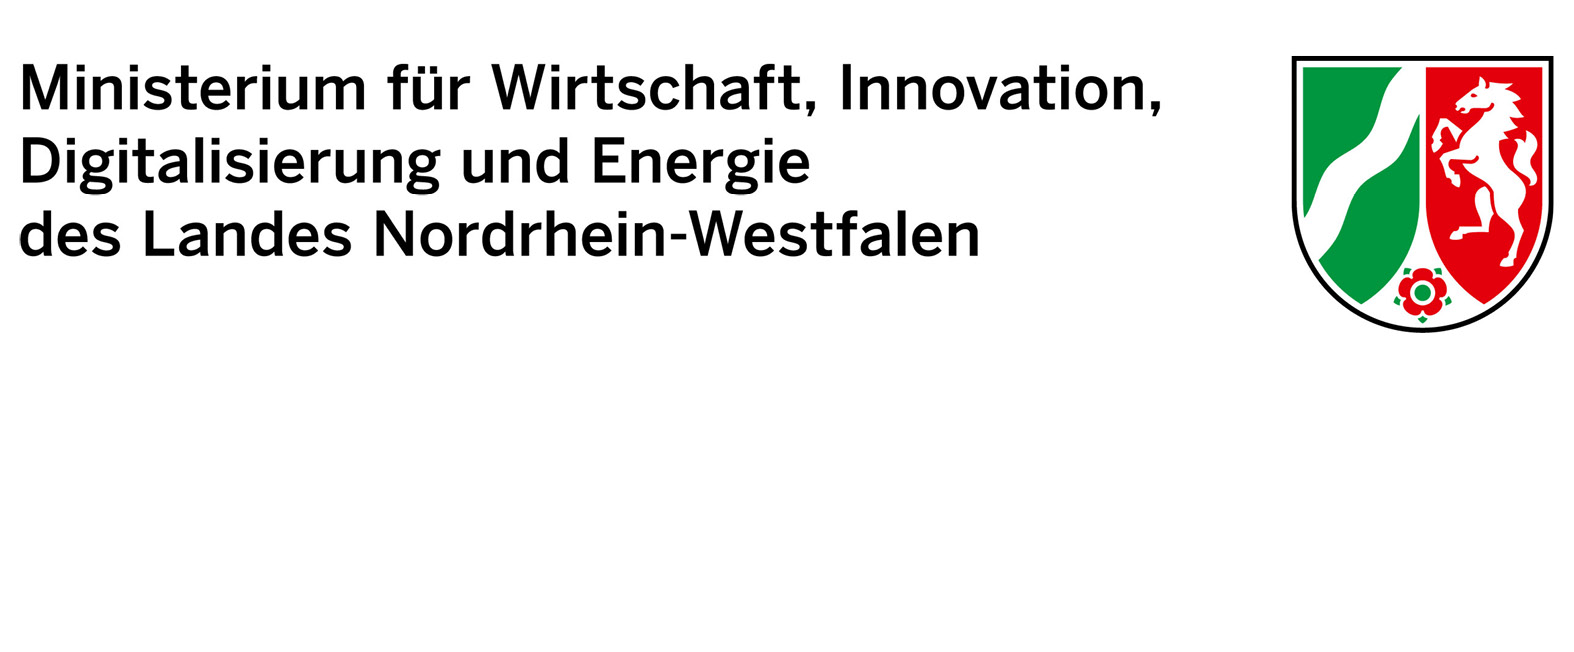 Ministry for Economic Affairs, Innovation, Digitization and Energy of the State of North Rhine-Westphalia.